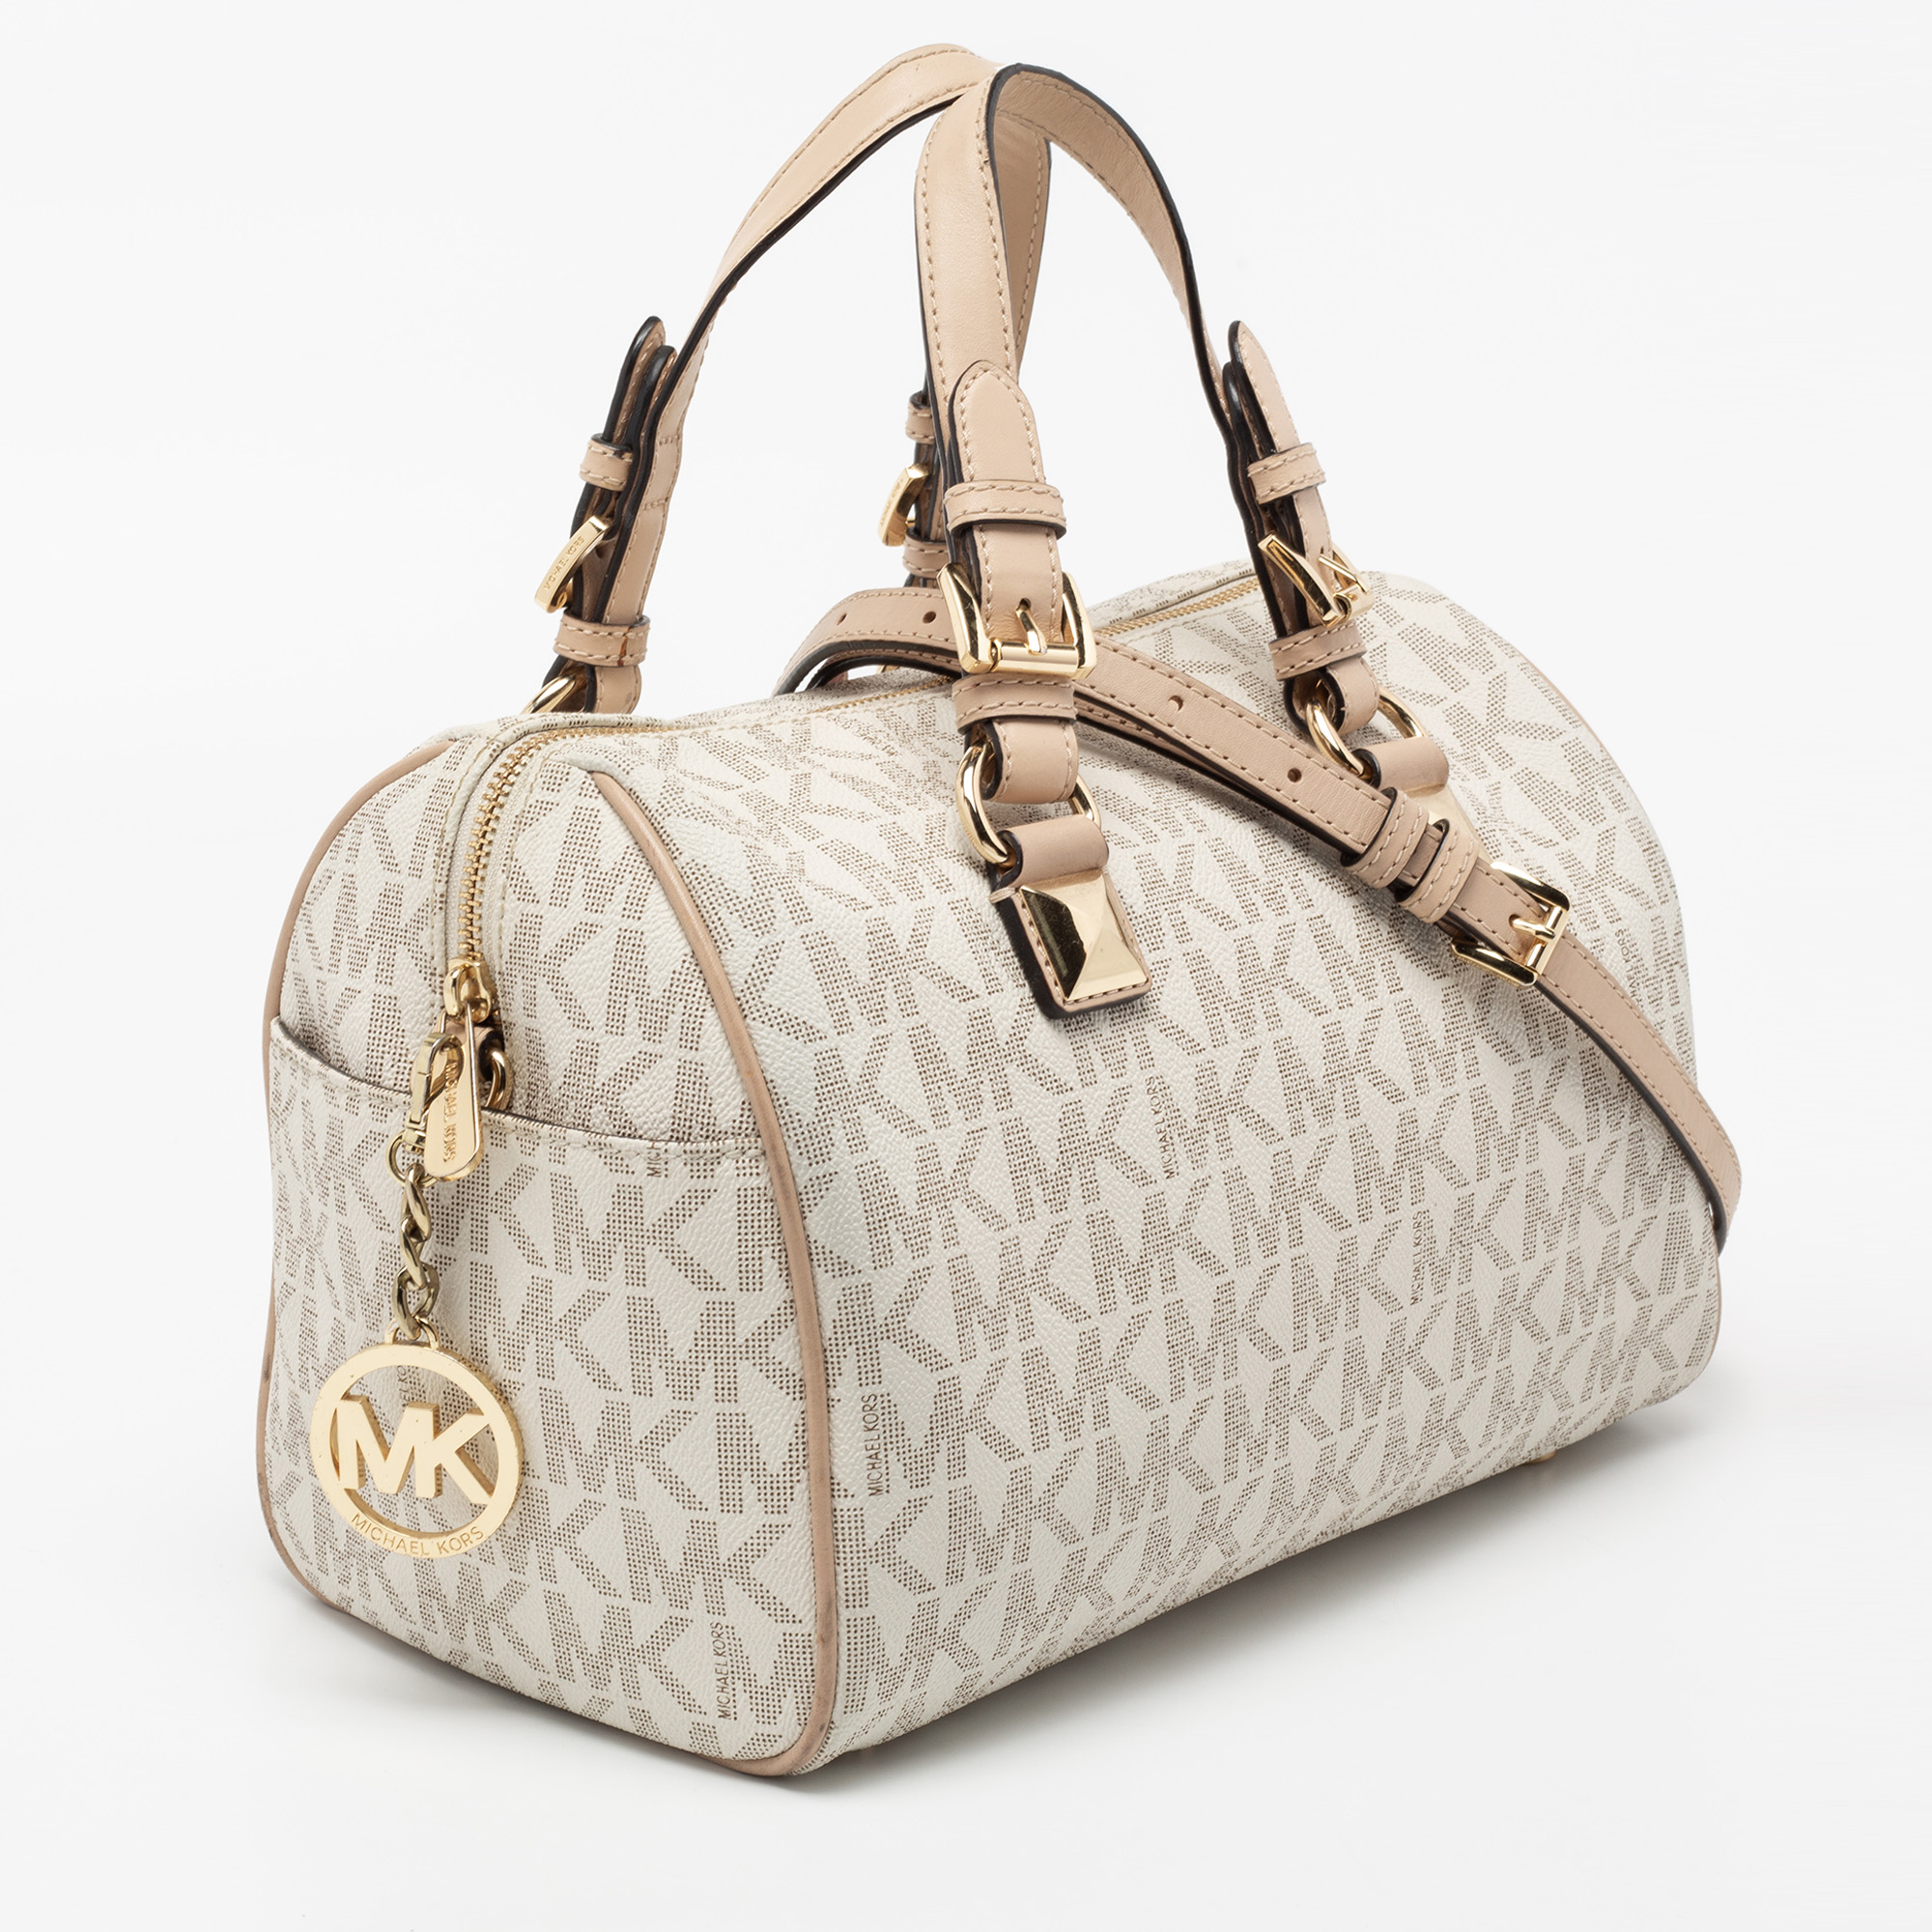 MICHAEL Michael Kors White/Beige Signature Coated Canvas And Leather Grayson Boston Bag